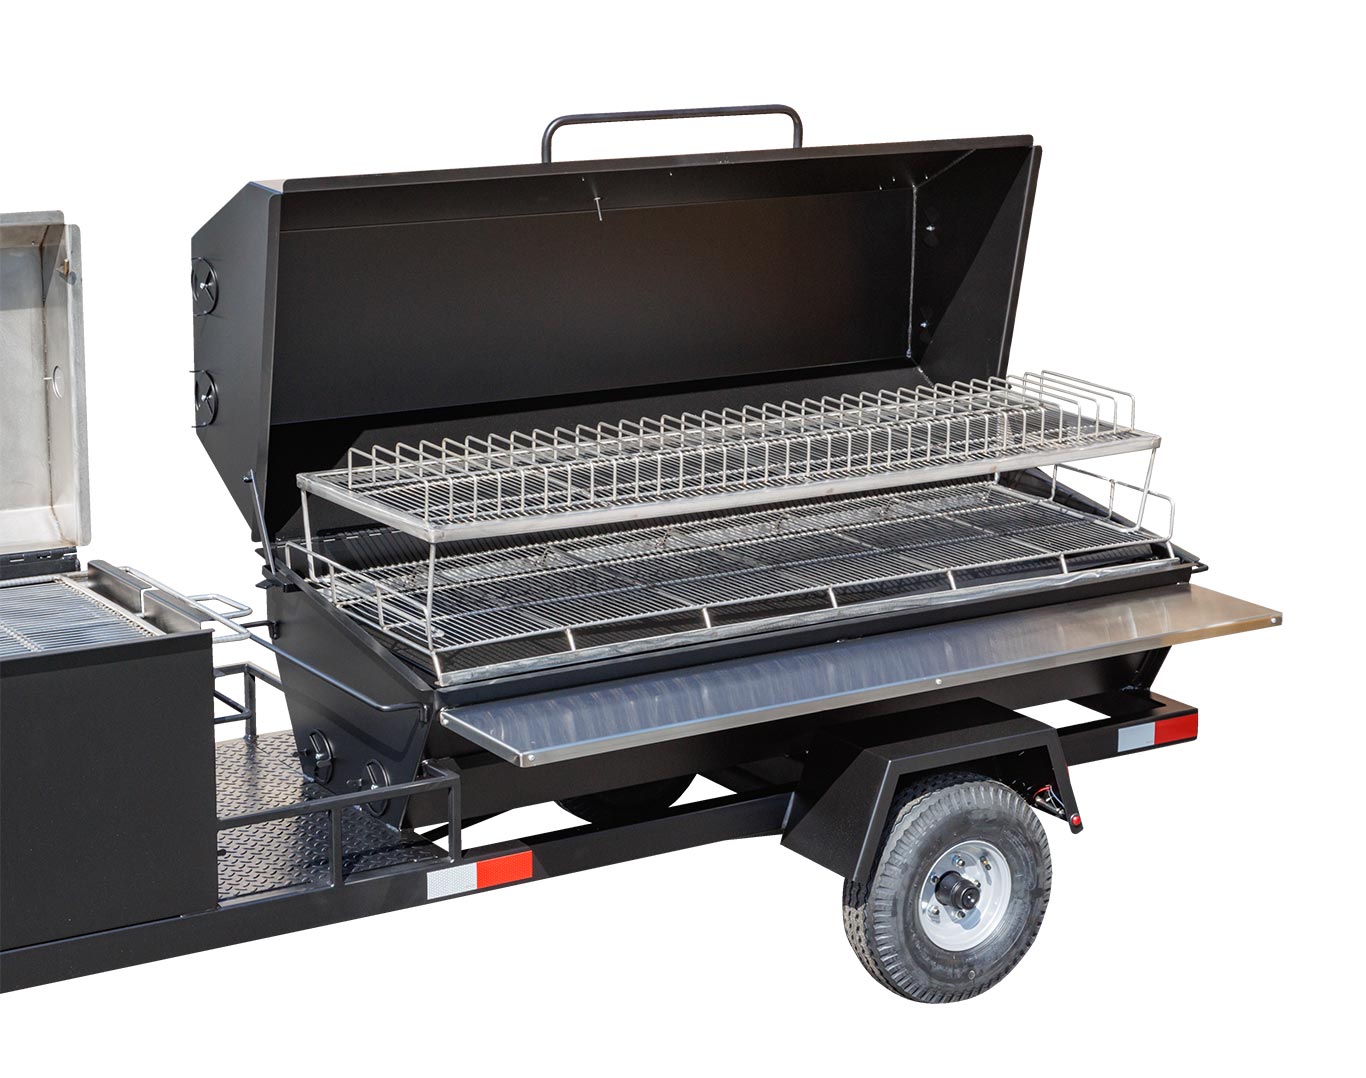 CaterGator Insulated Food Pan Carrier - Meadow Creek Barbecue Supply